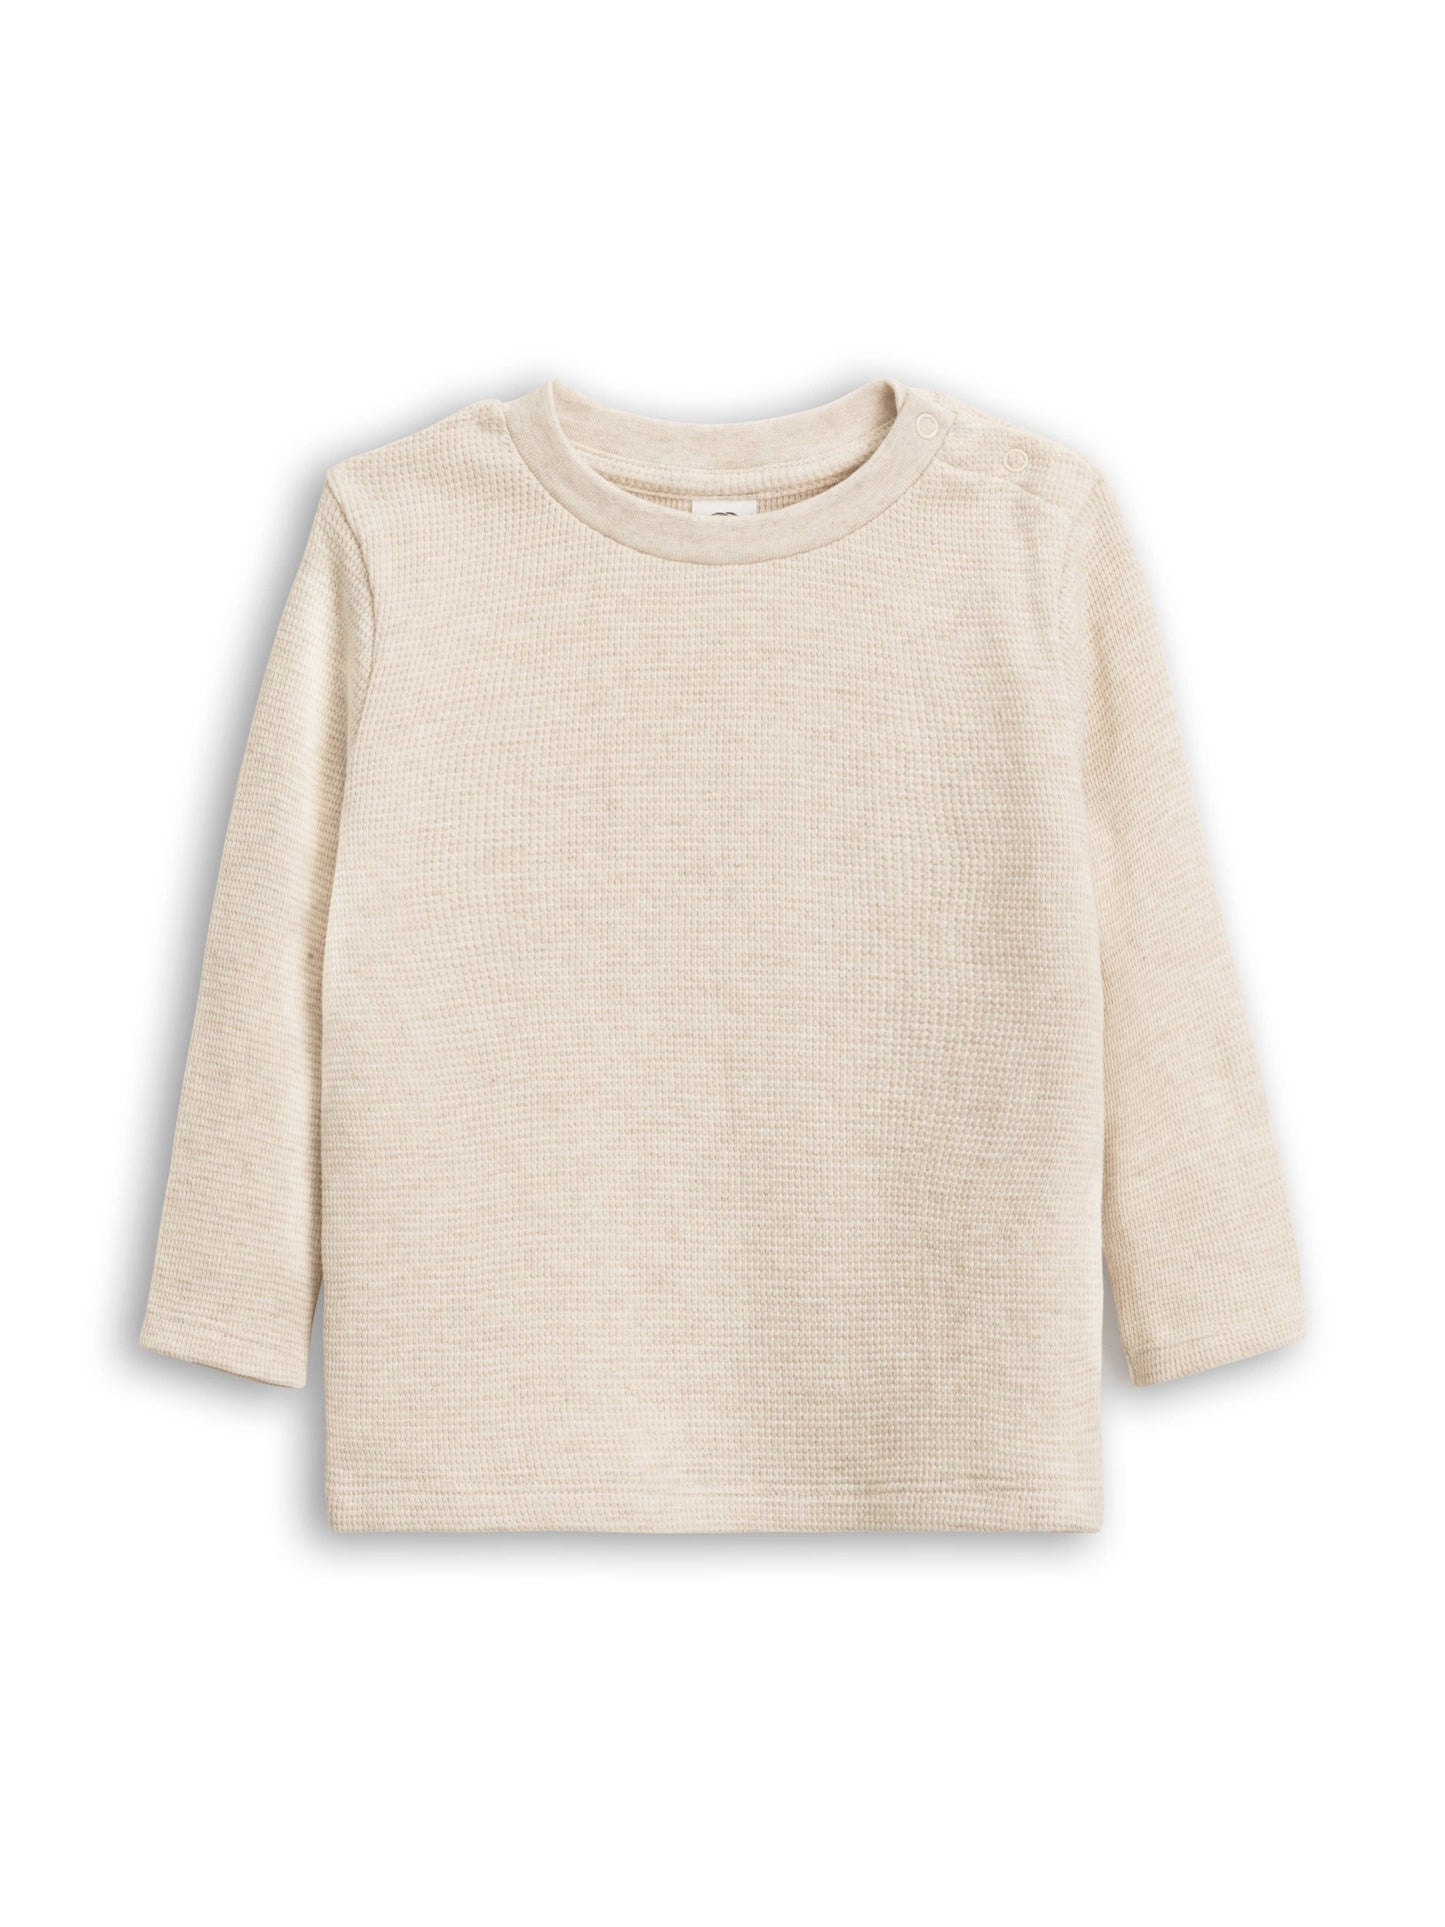 Organic Baby and Kids Mesa Waffle Knit Top - Heather Oat